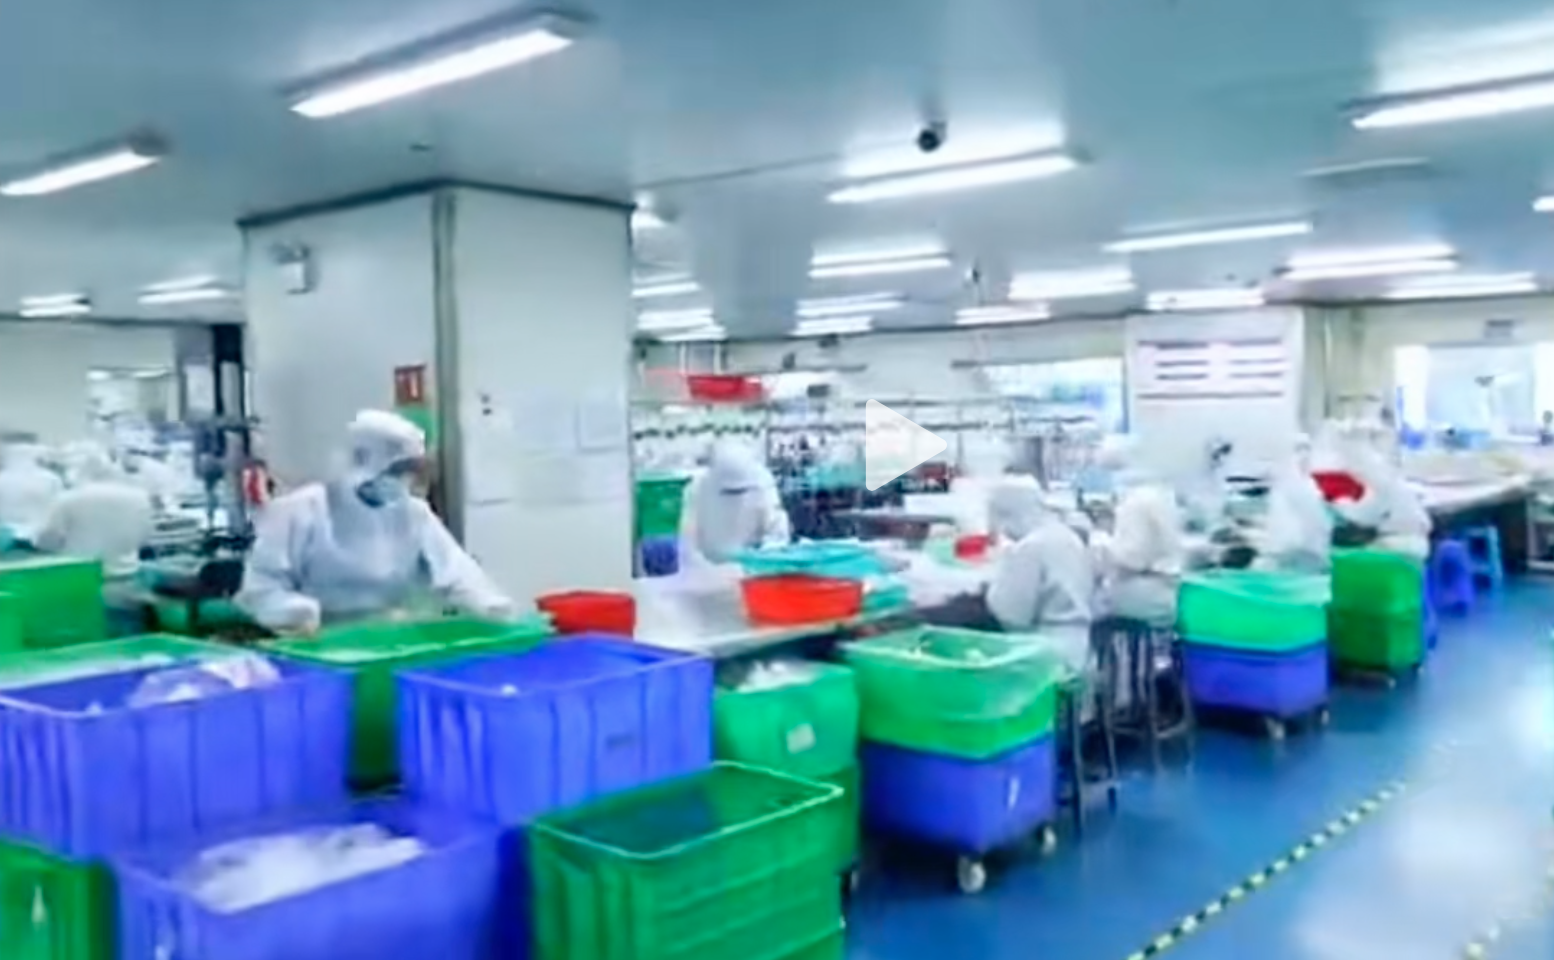 A screenshot from Flexicare Dongguan's factory tour video shows workers producing medical supplies